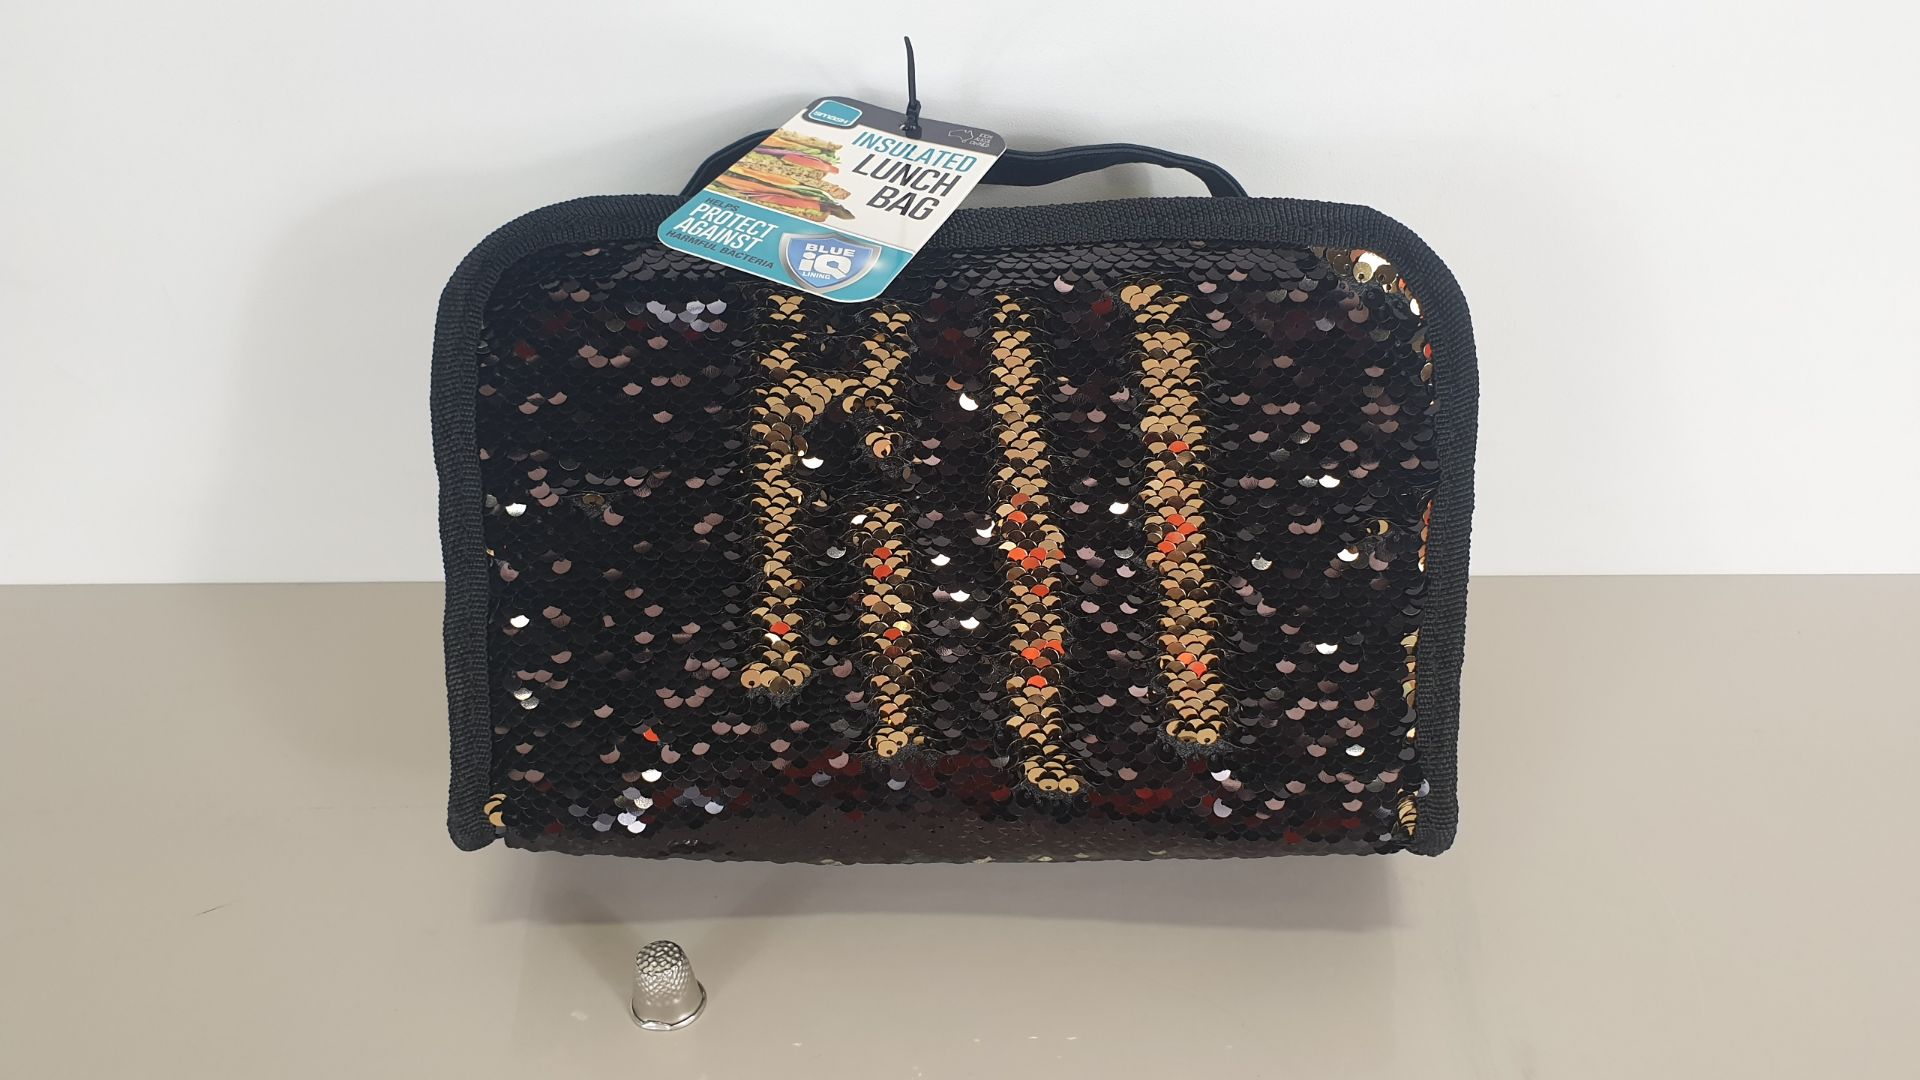 16 X BRAND NEW SMASH GLOBAL BLACK/GOLD SEQUINED INSULATED LUNCH BAG (CHANGES COLOUR WHEN YOU RUB